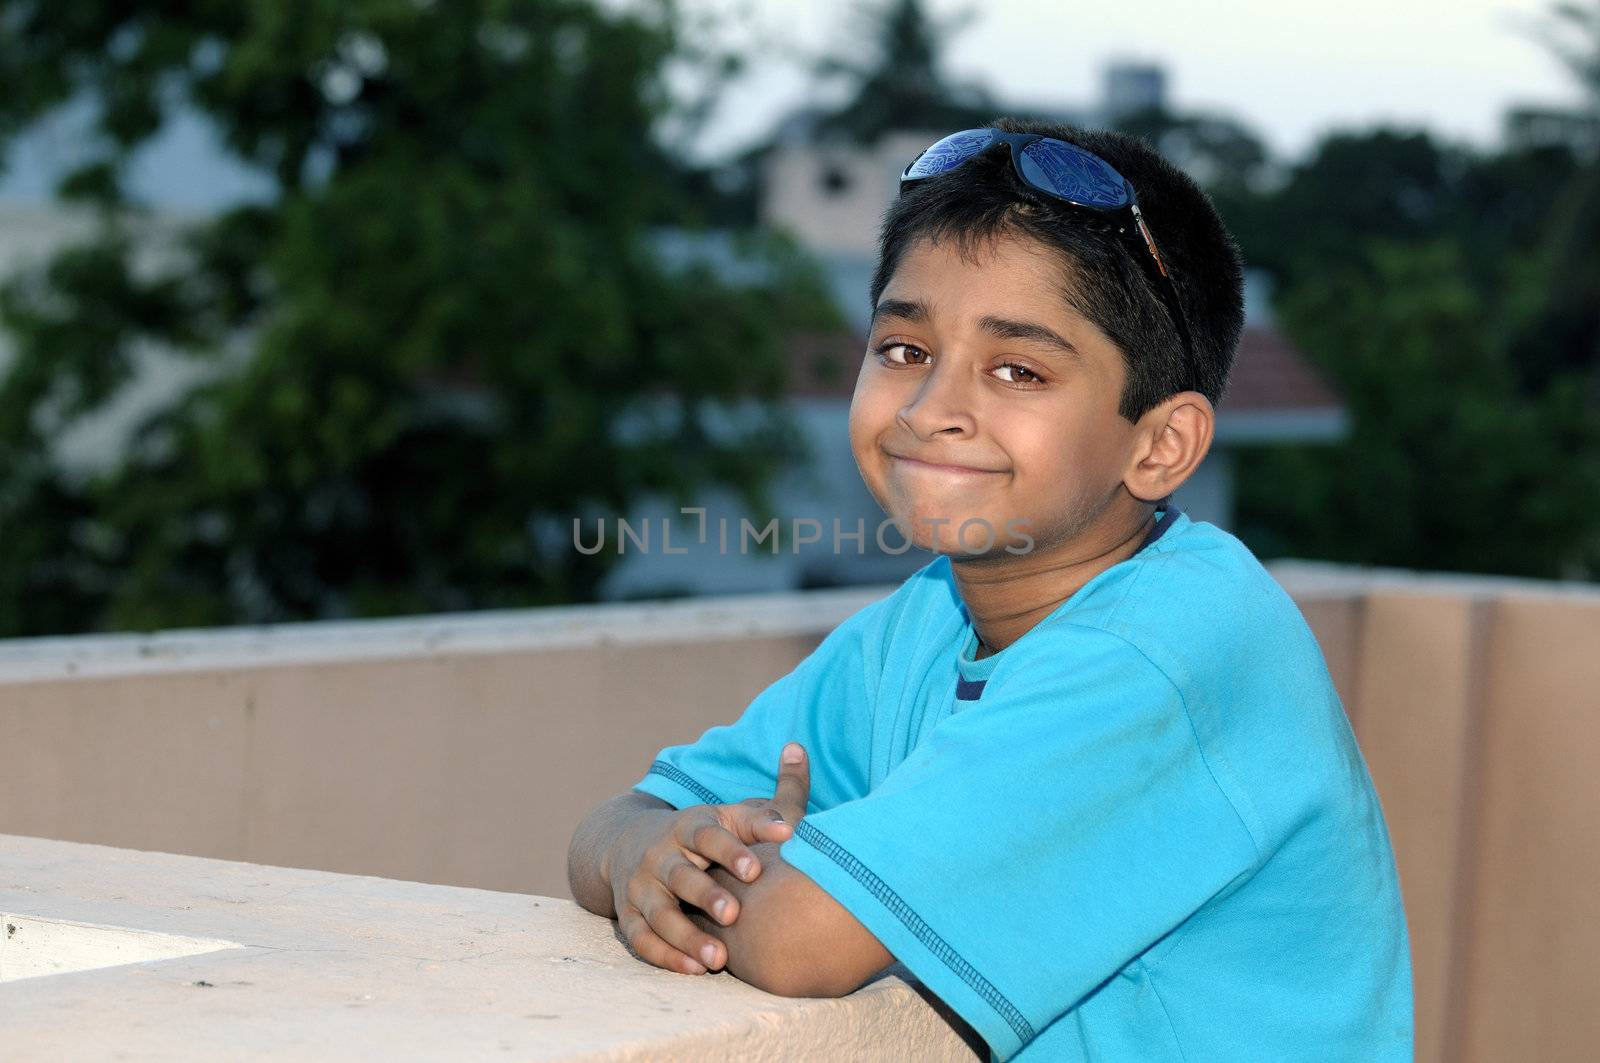 A handsome Indian kid model posing with his sun glasses